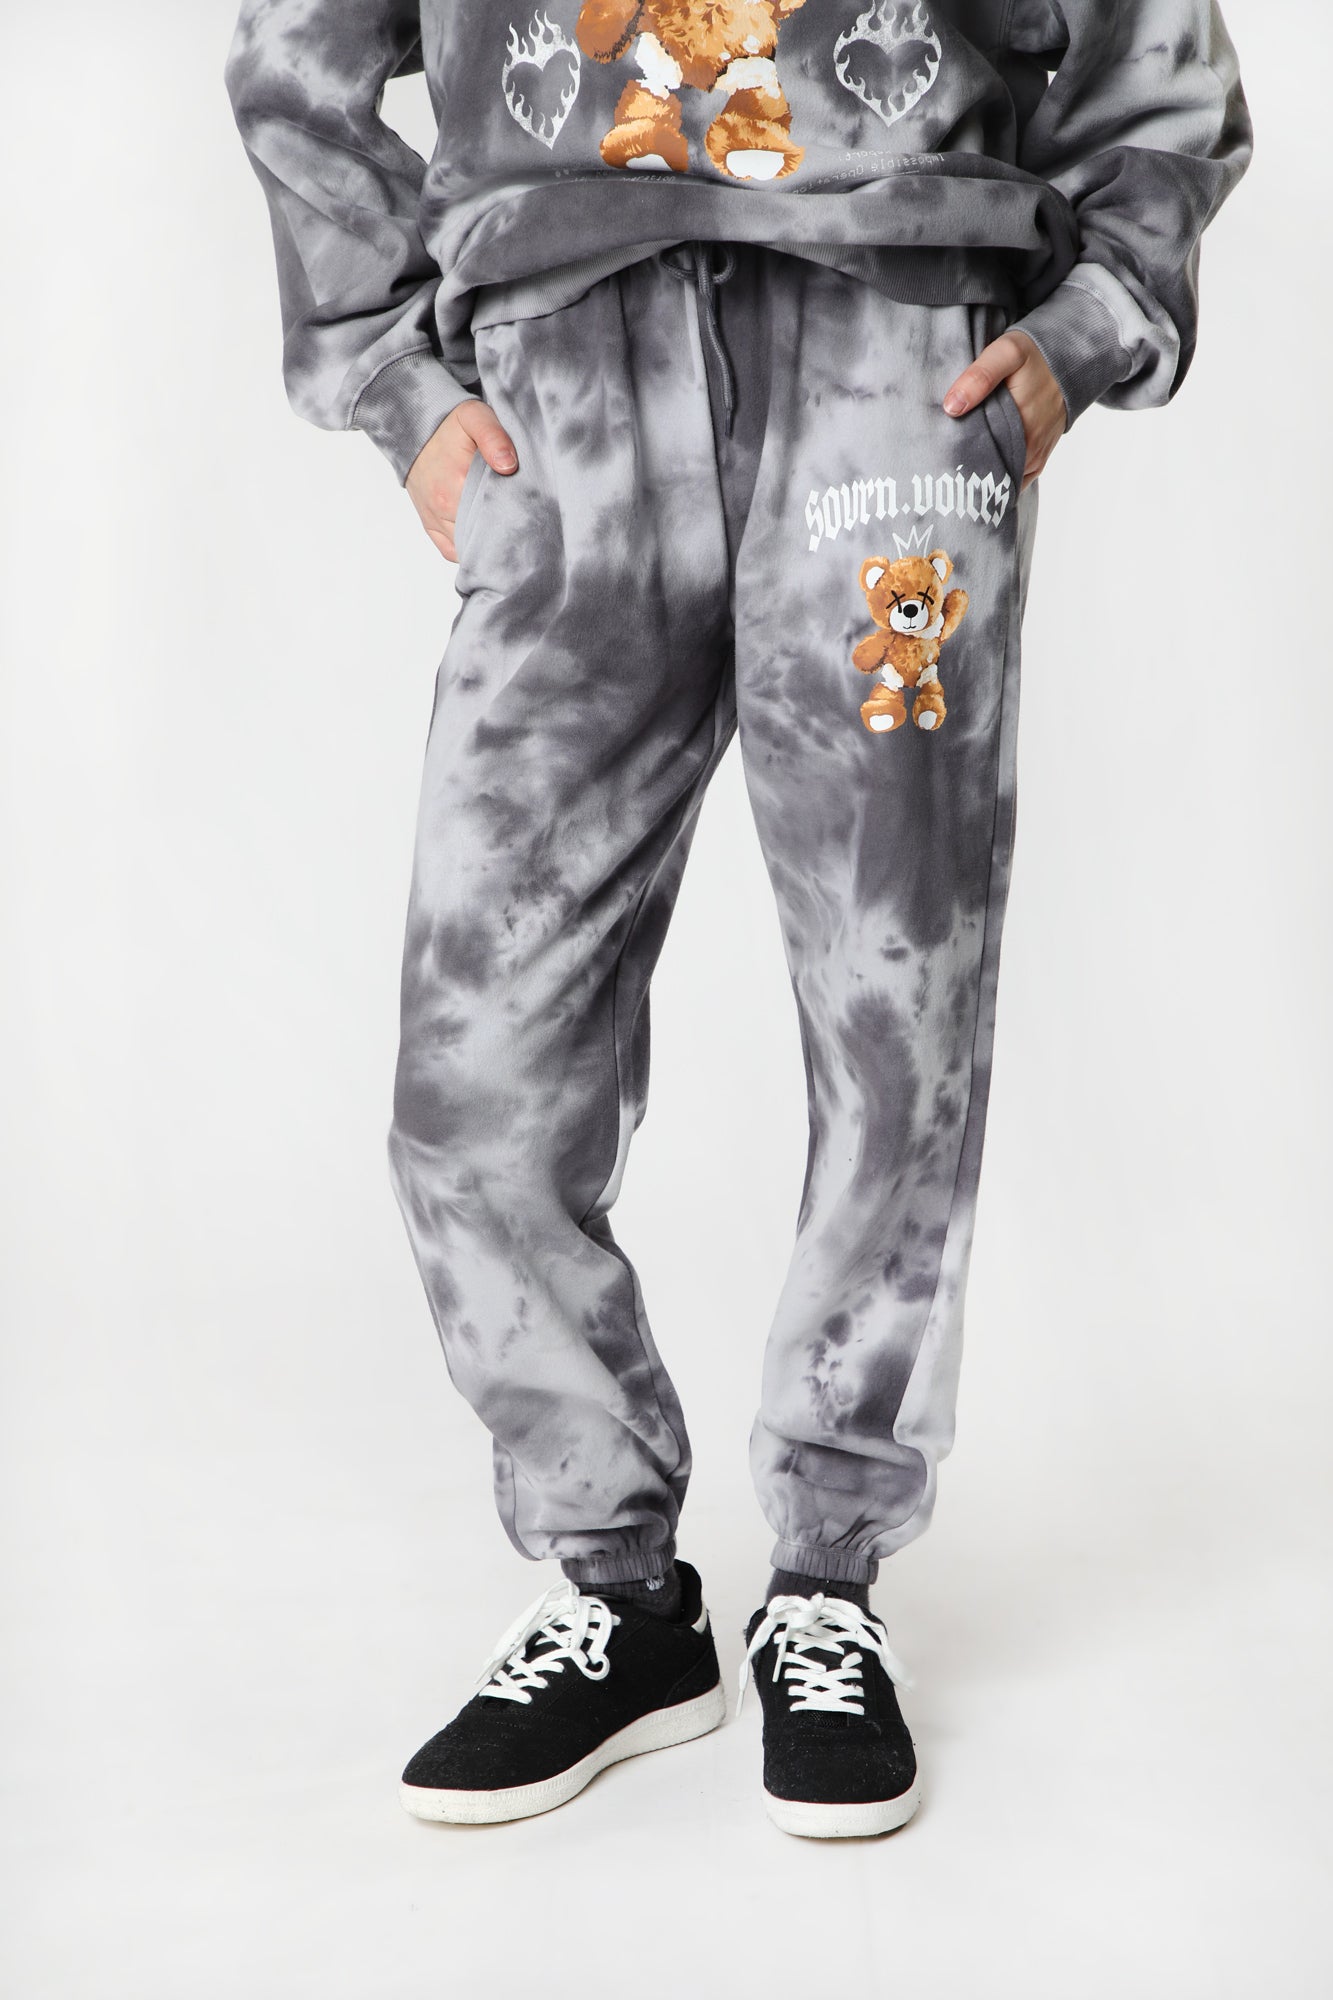 Womens Sovrn Voices Tie-Dye Sweatpant - Black with White /